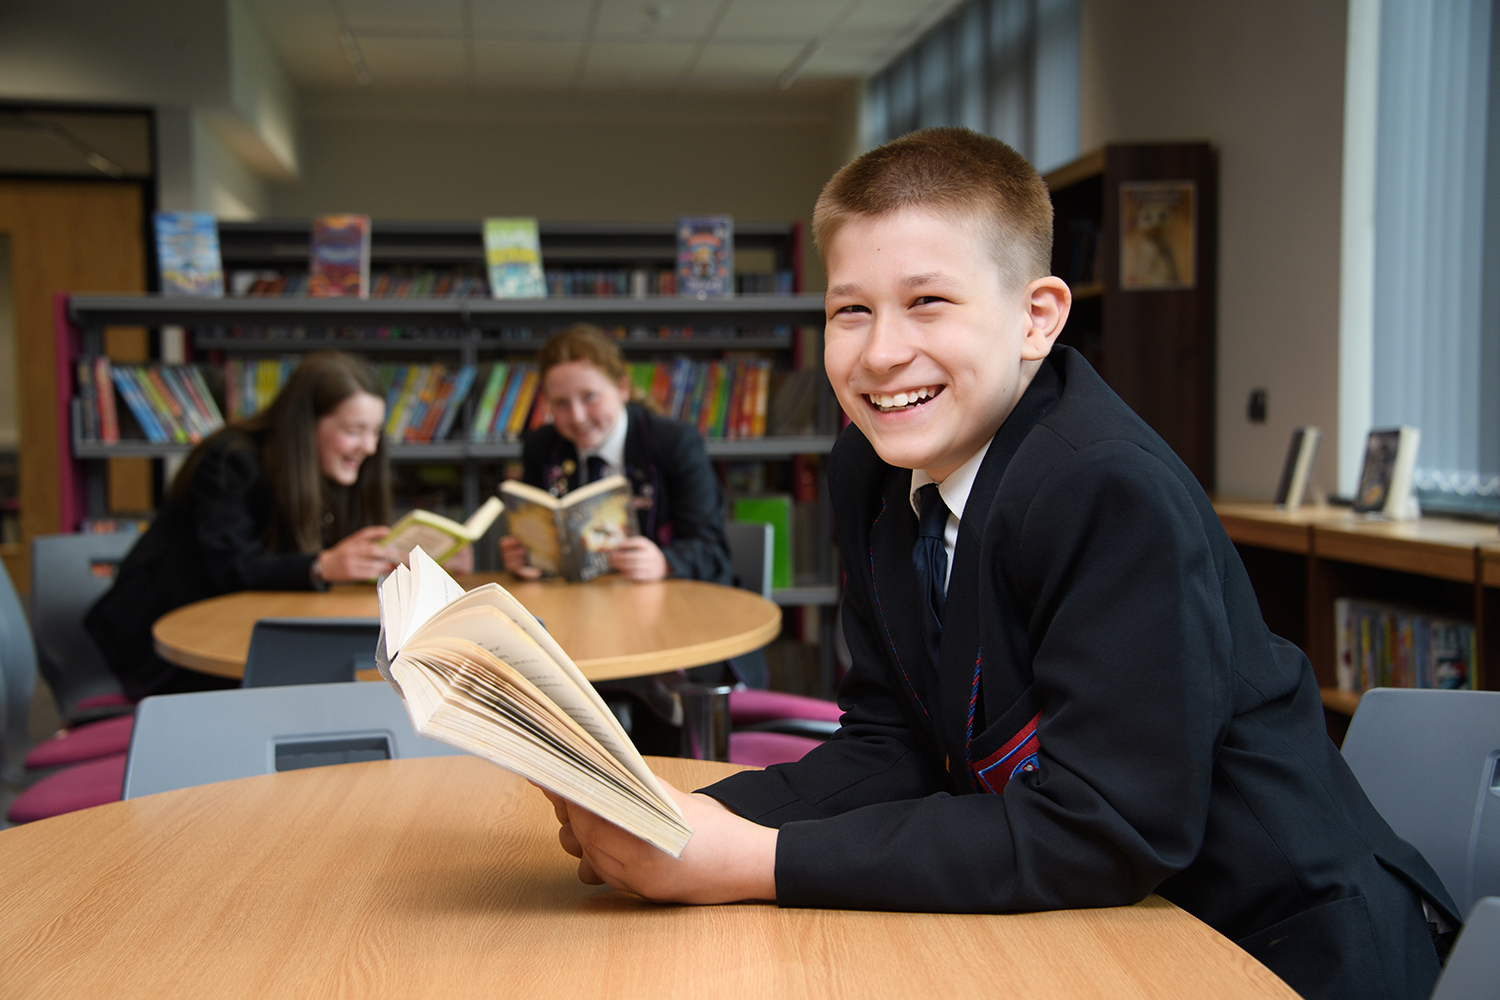 Boy in the library holding a book and smiling at the camera, with two students reading in the background